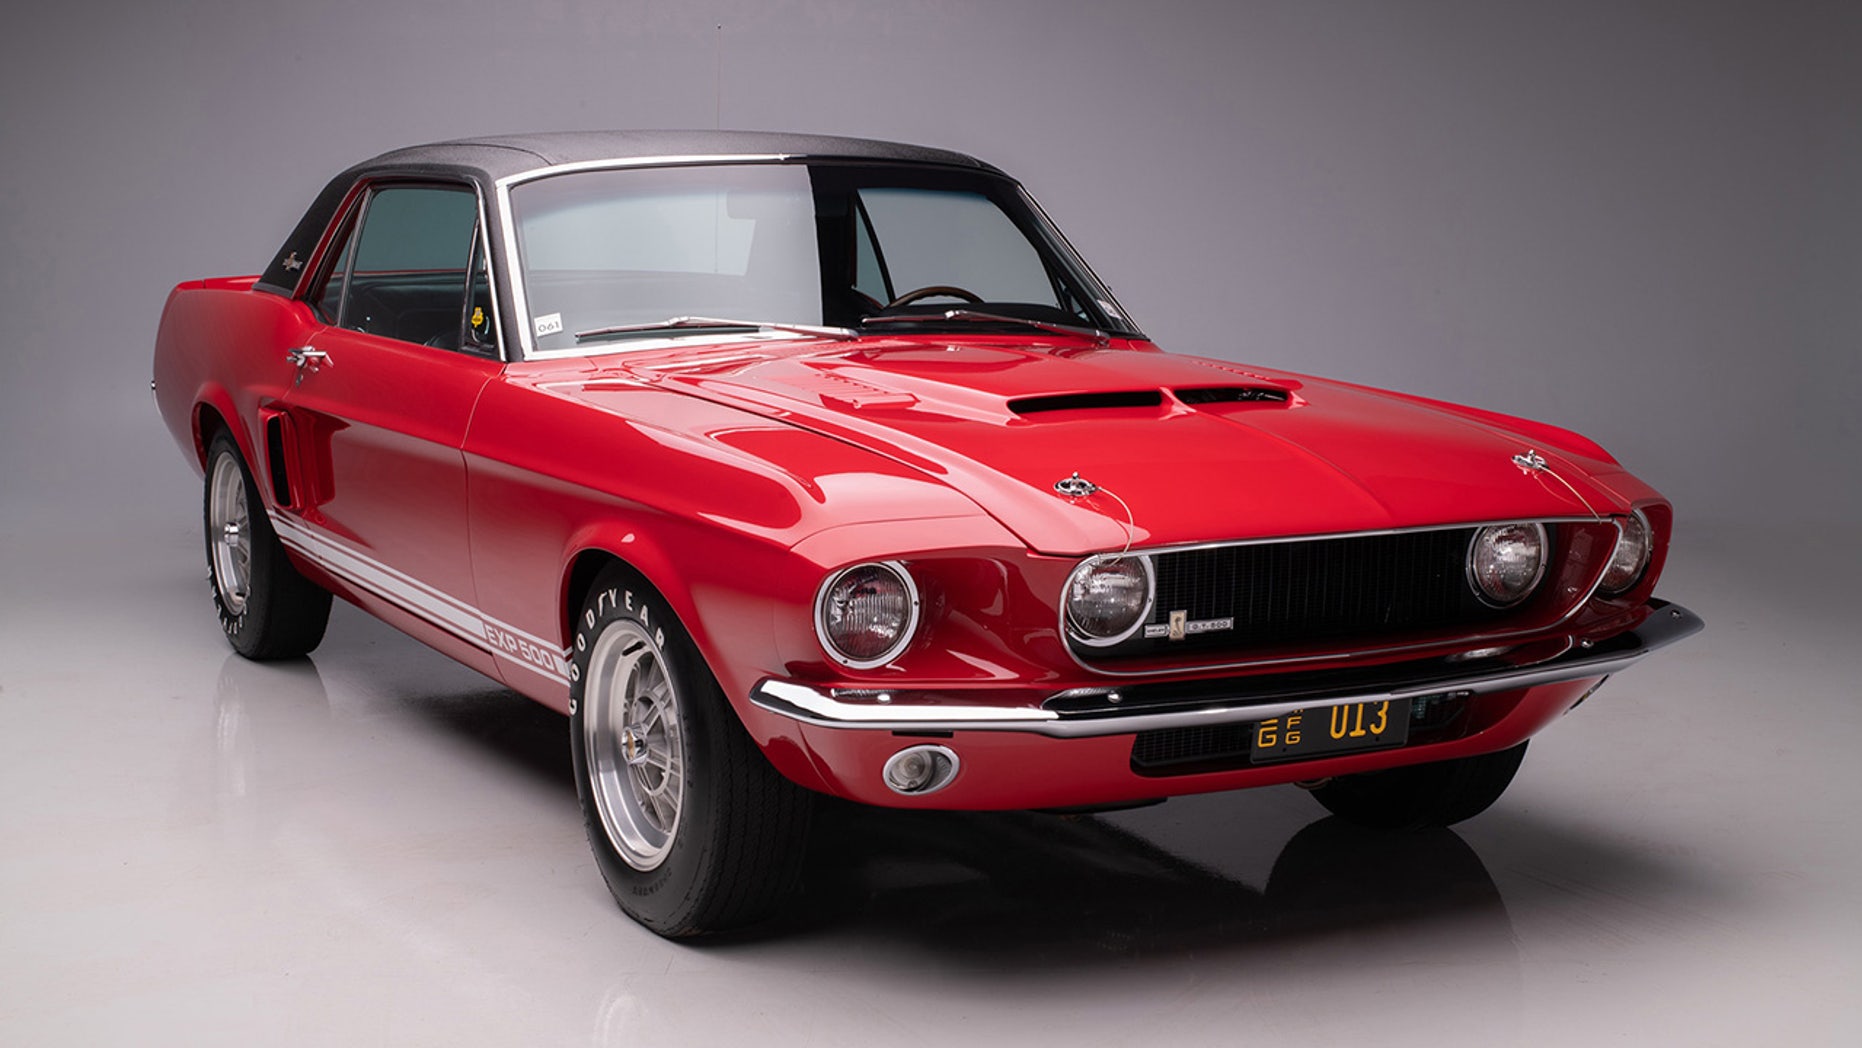 Little Red 1967 Ford Mustang Shelby Gt500 Found After 50 Years Could